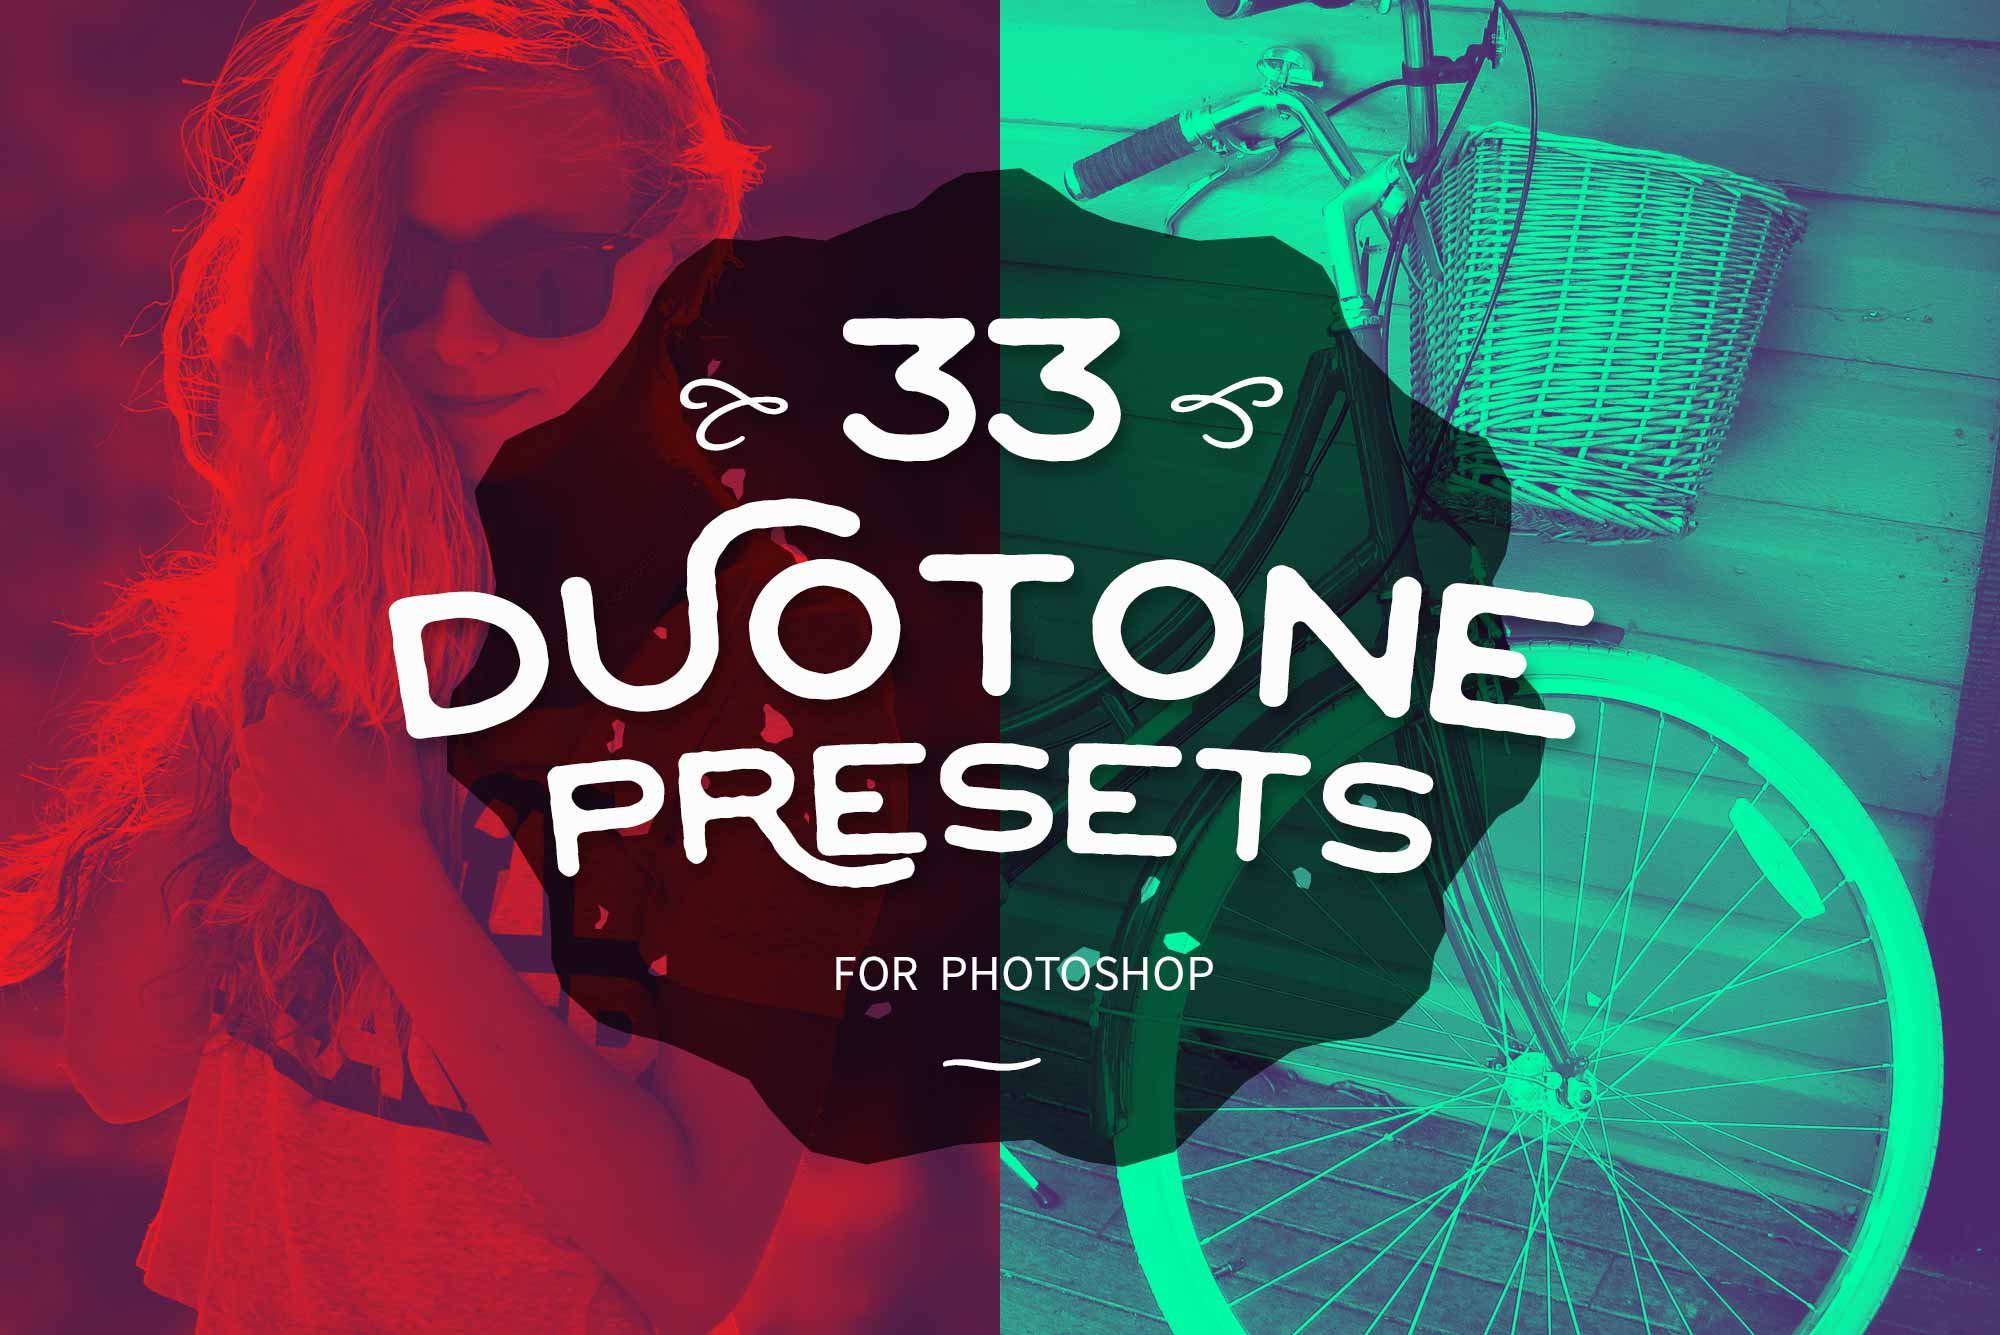 Duotone Presets for Photoshopcover image.